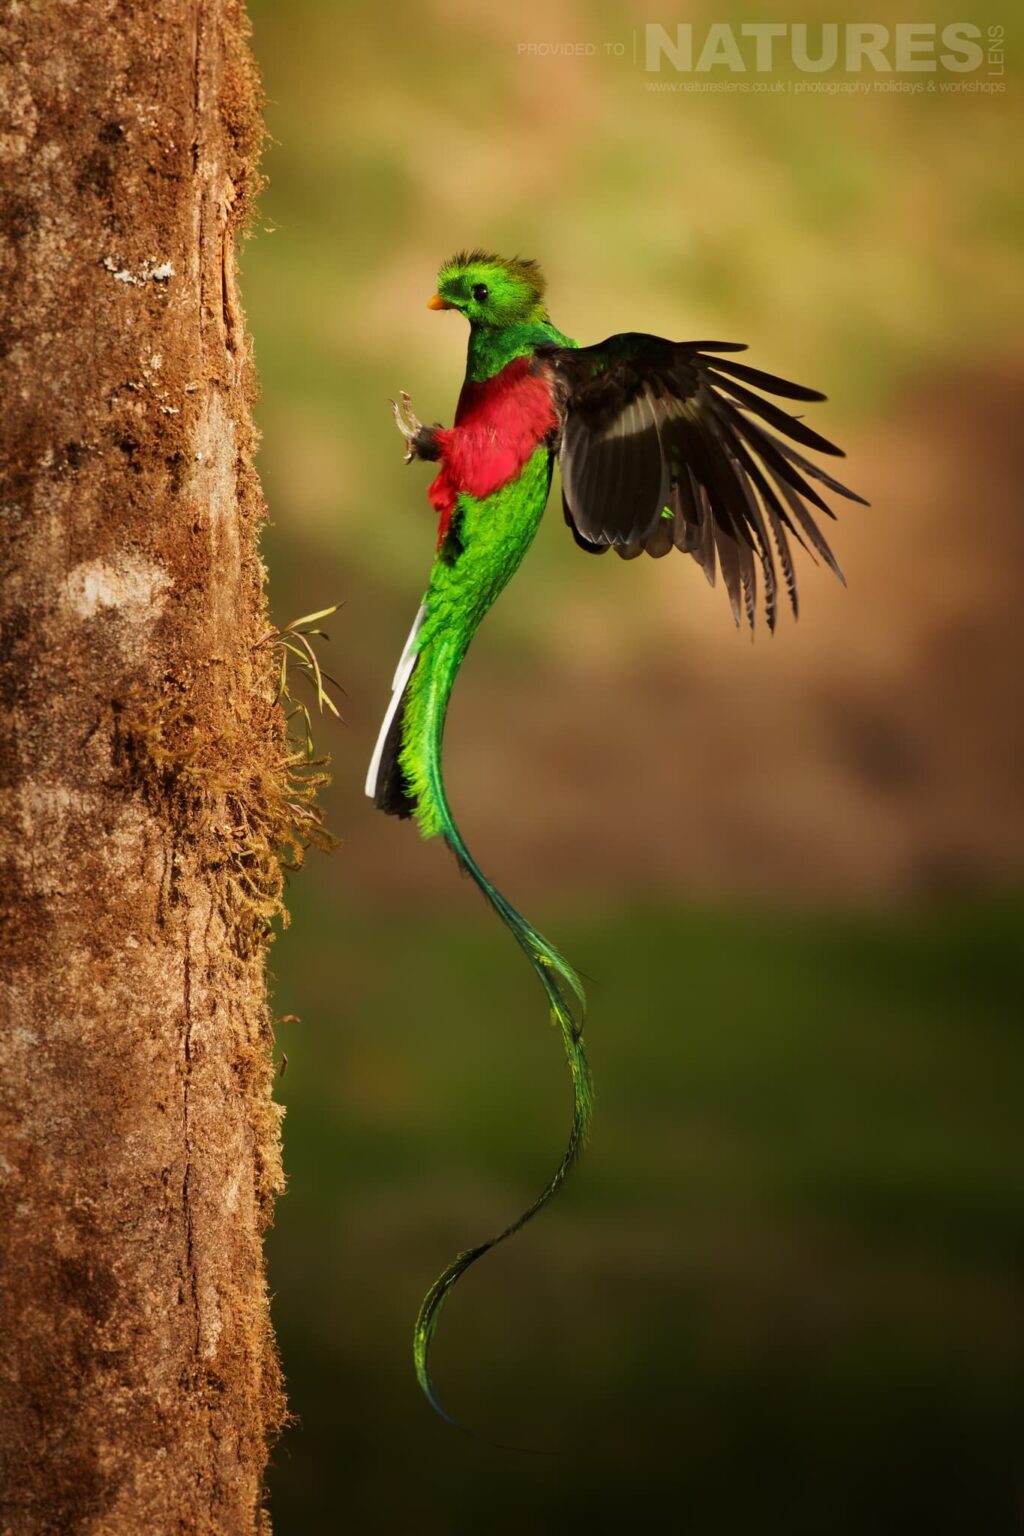 A Respendent Quetzal in flight at a nesting site - which can be photographed during the NaturesLens Quetzals & Other Iconic Wildlife of Costa Rica photography holiday